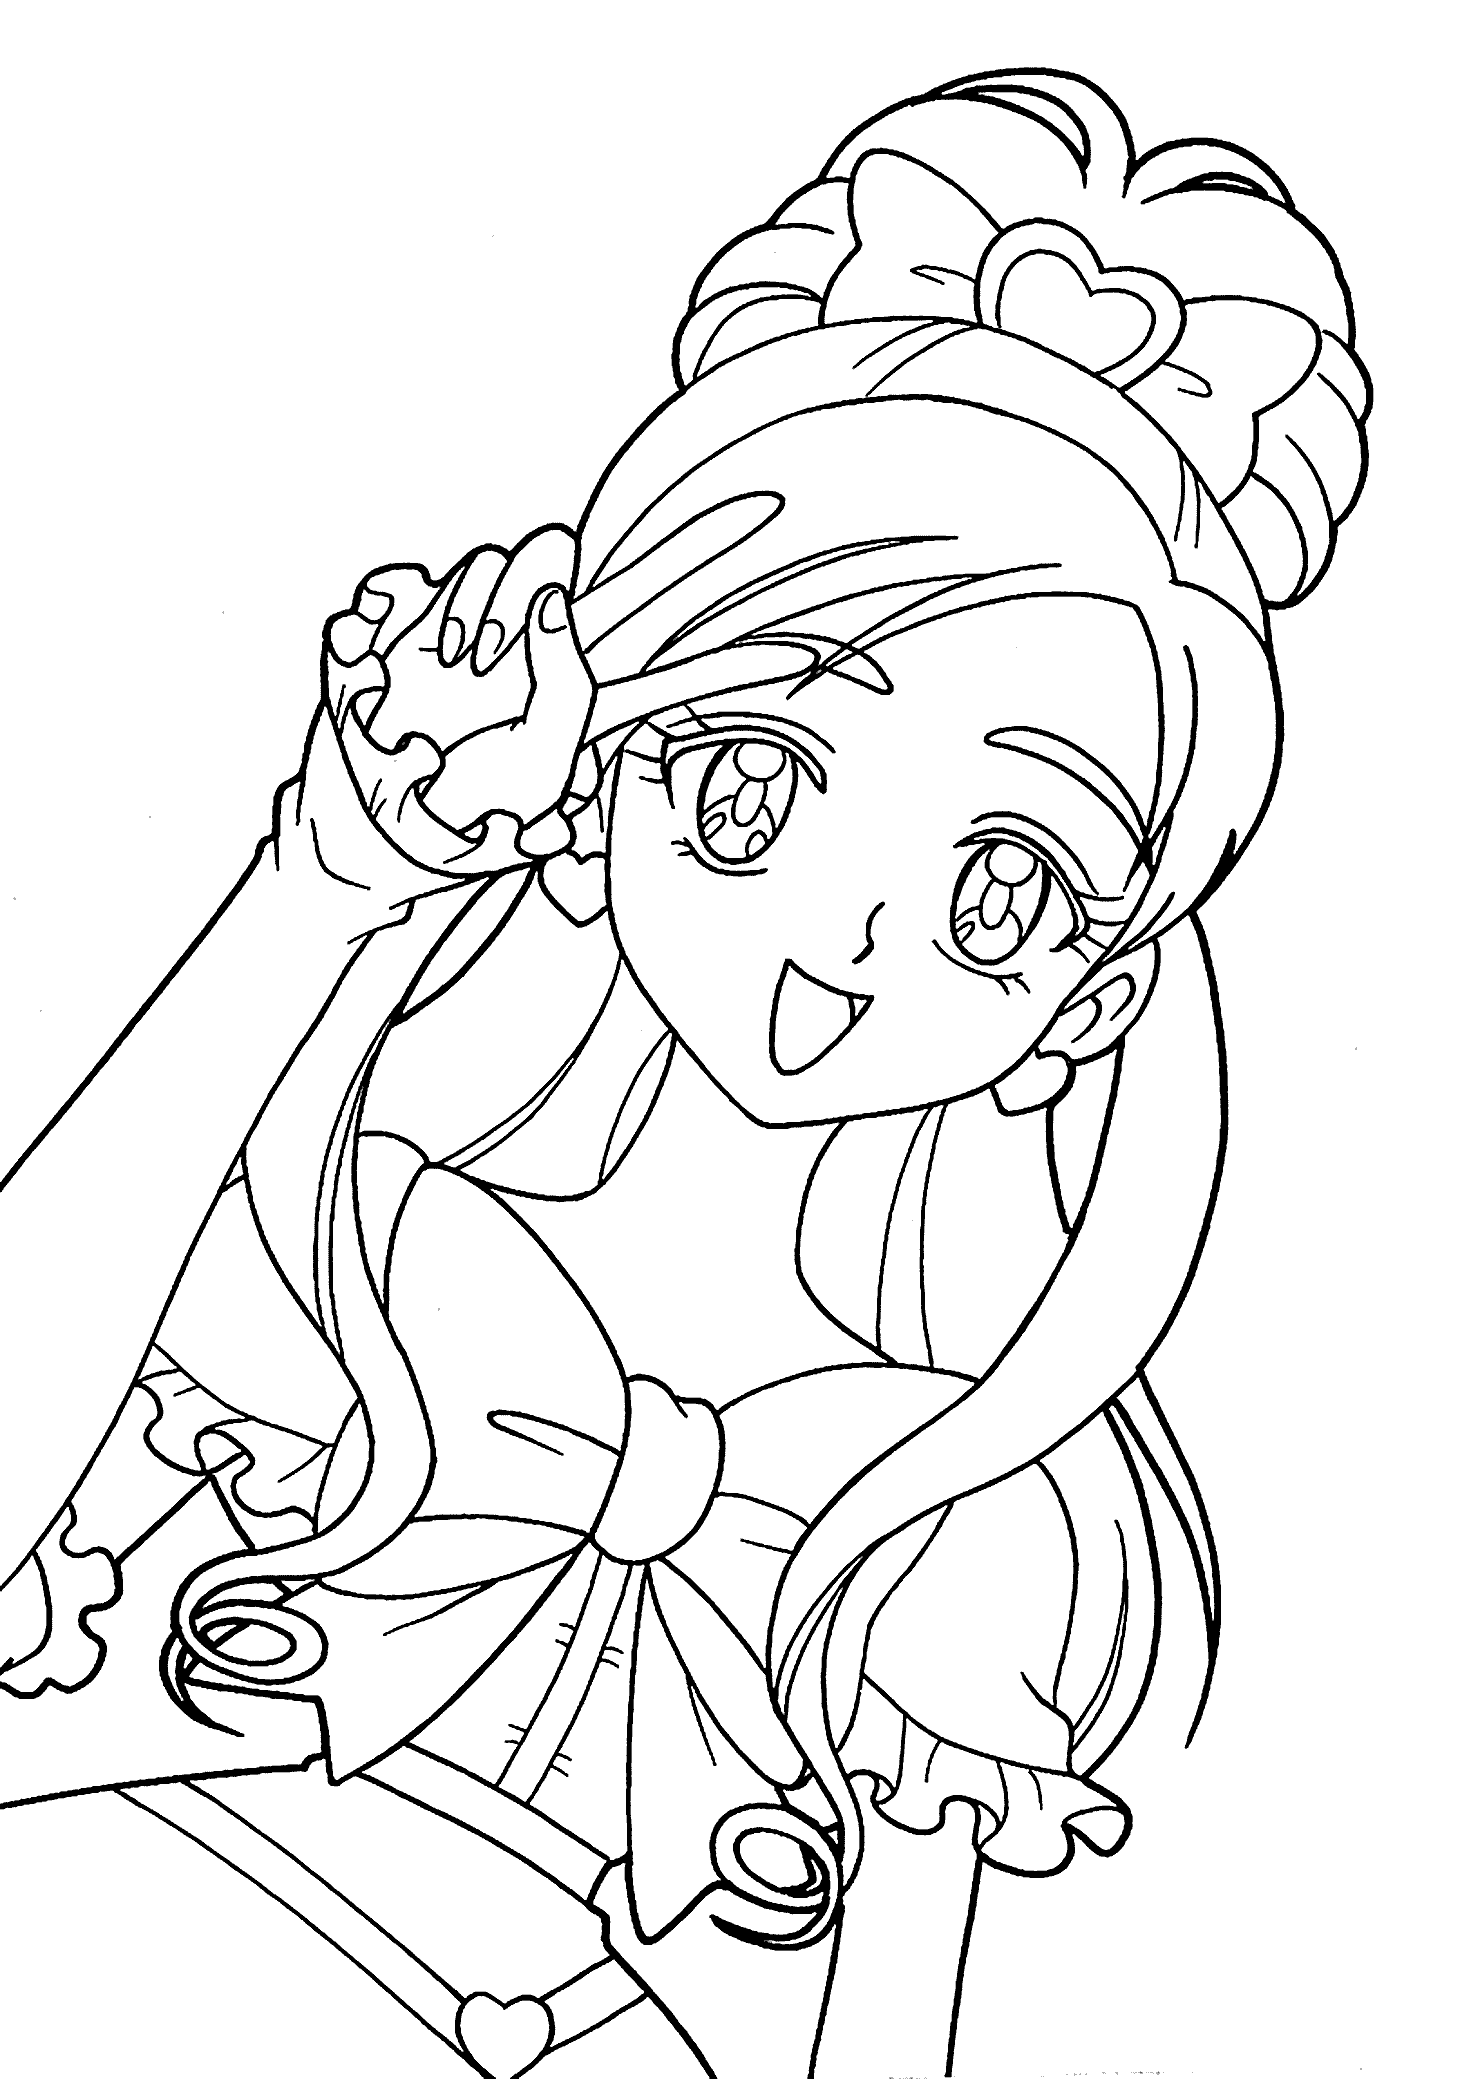 Free Printable Anime Cute Coloring Pages for Kids - Coloring Pages  GBcoloring